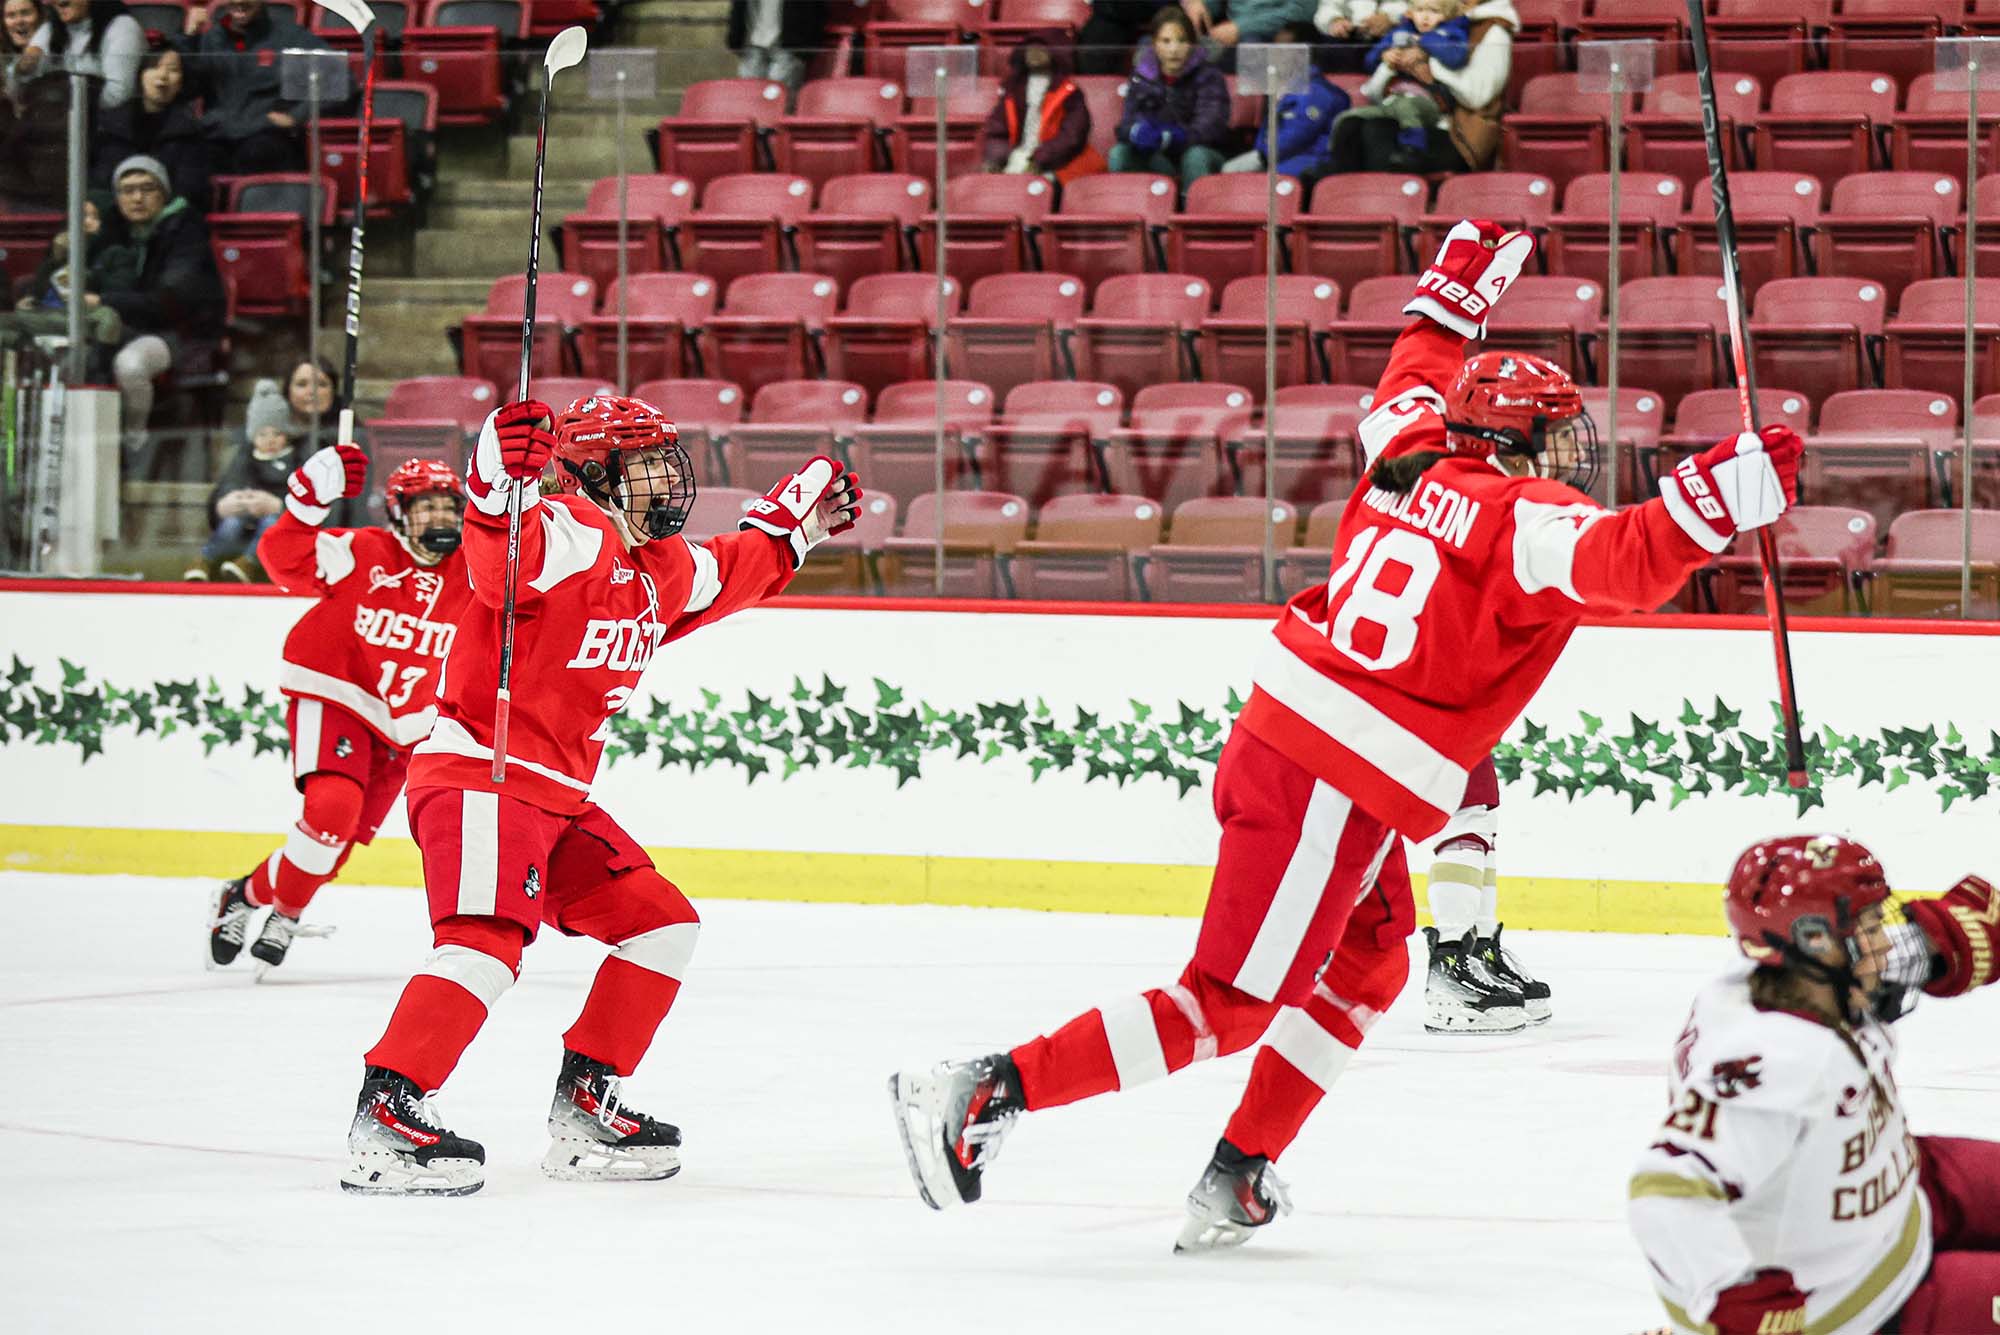 Photo: A group of women's hockey players in red and white jerseys celebrate after a goal during the beanpot semifinals